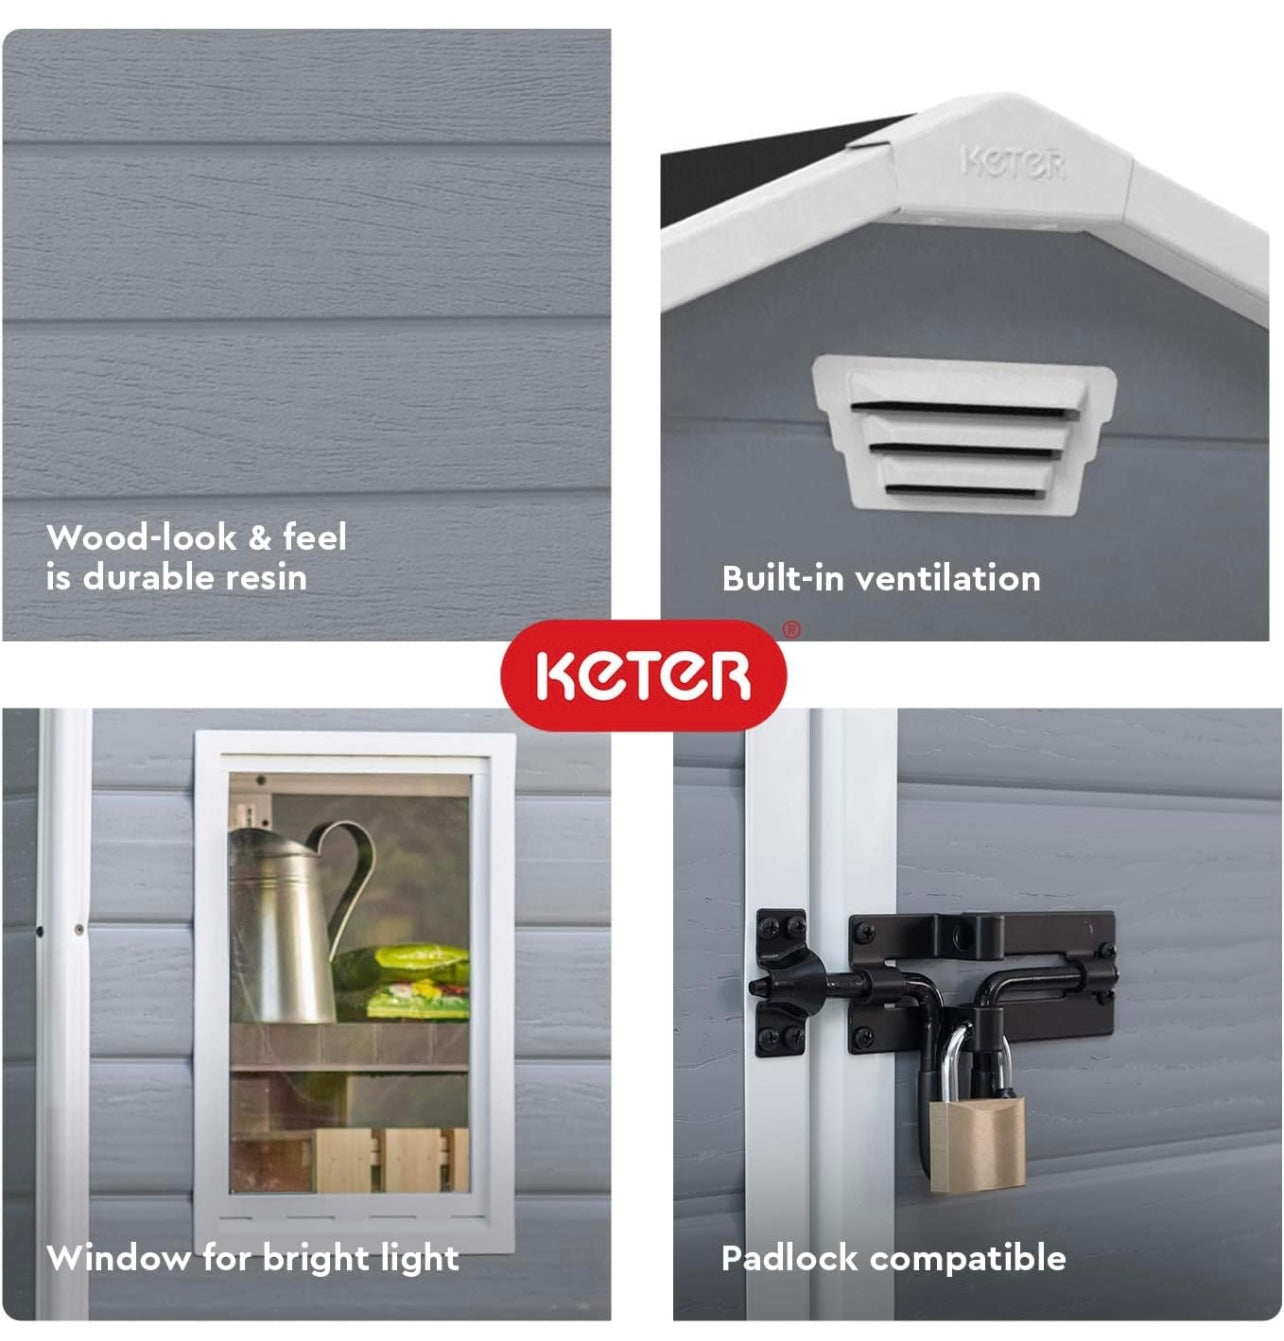 Keter Manor 4x6 Resin Outdoor Storage Shed Kit-Perfect to Store Patio Furniture, Garden Tools Bike Accessories, Beach Chairs and Lawn Mower, Grey & White - Elite Edge Essentials 